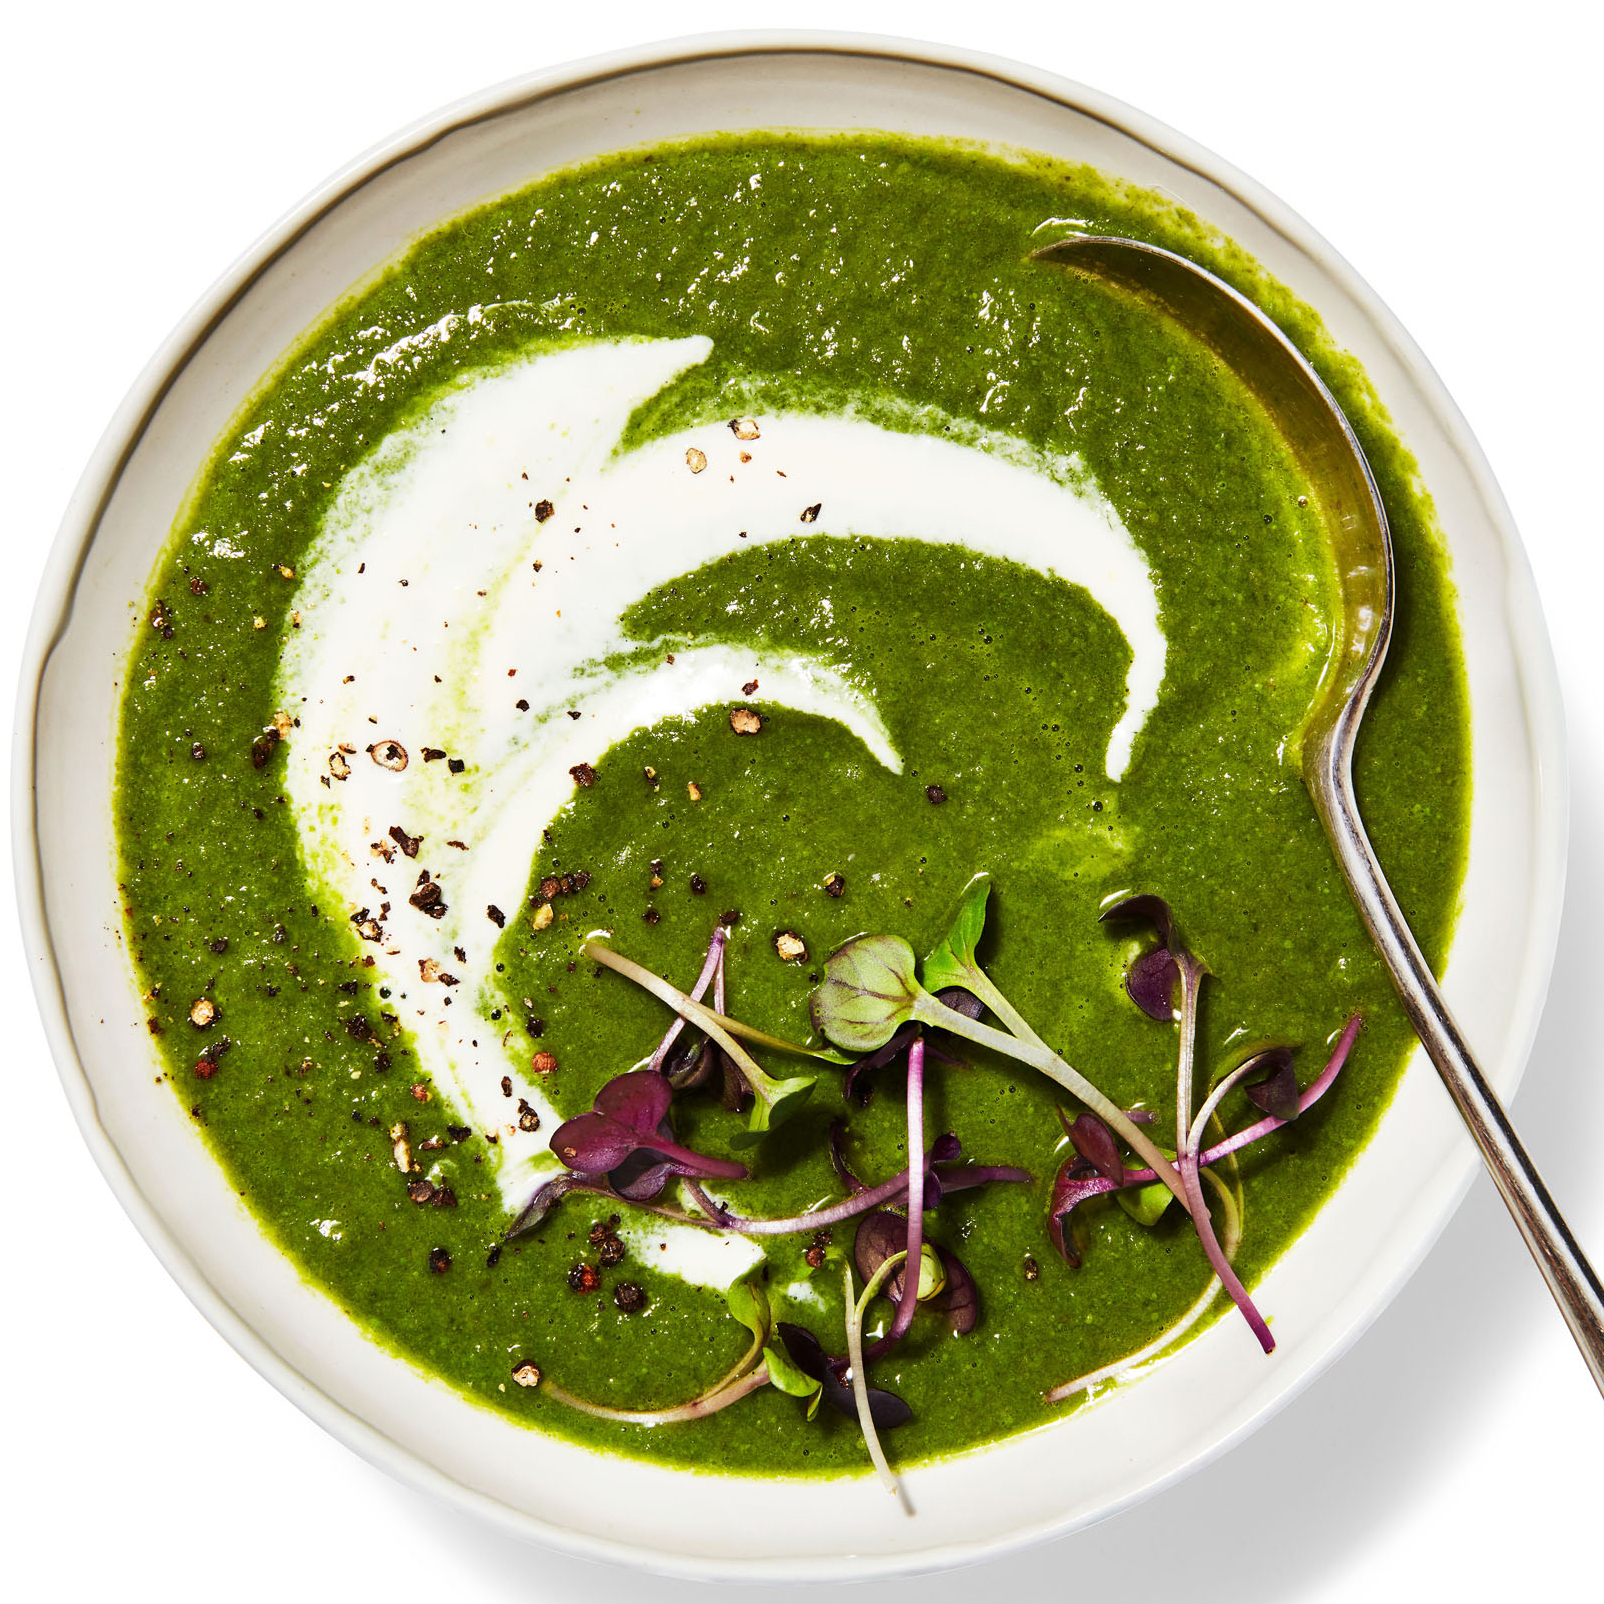 Spinach-Pea Soup in bowl with spoon